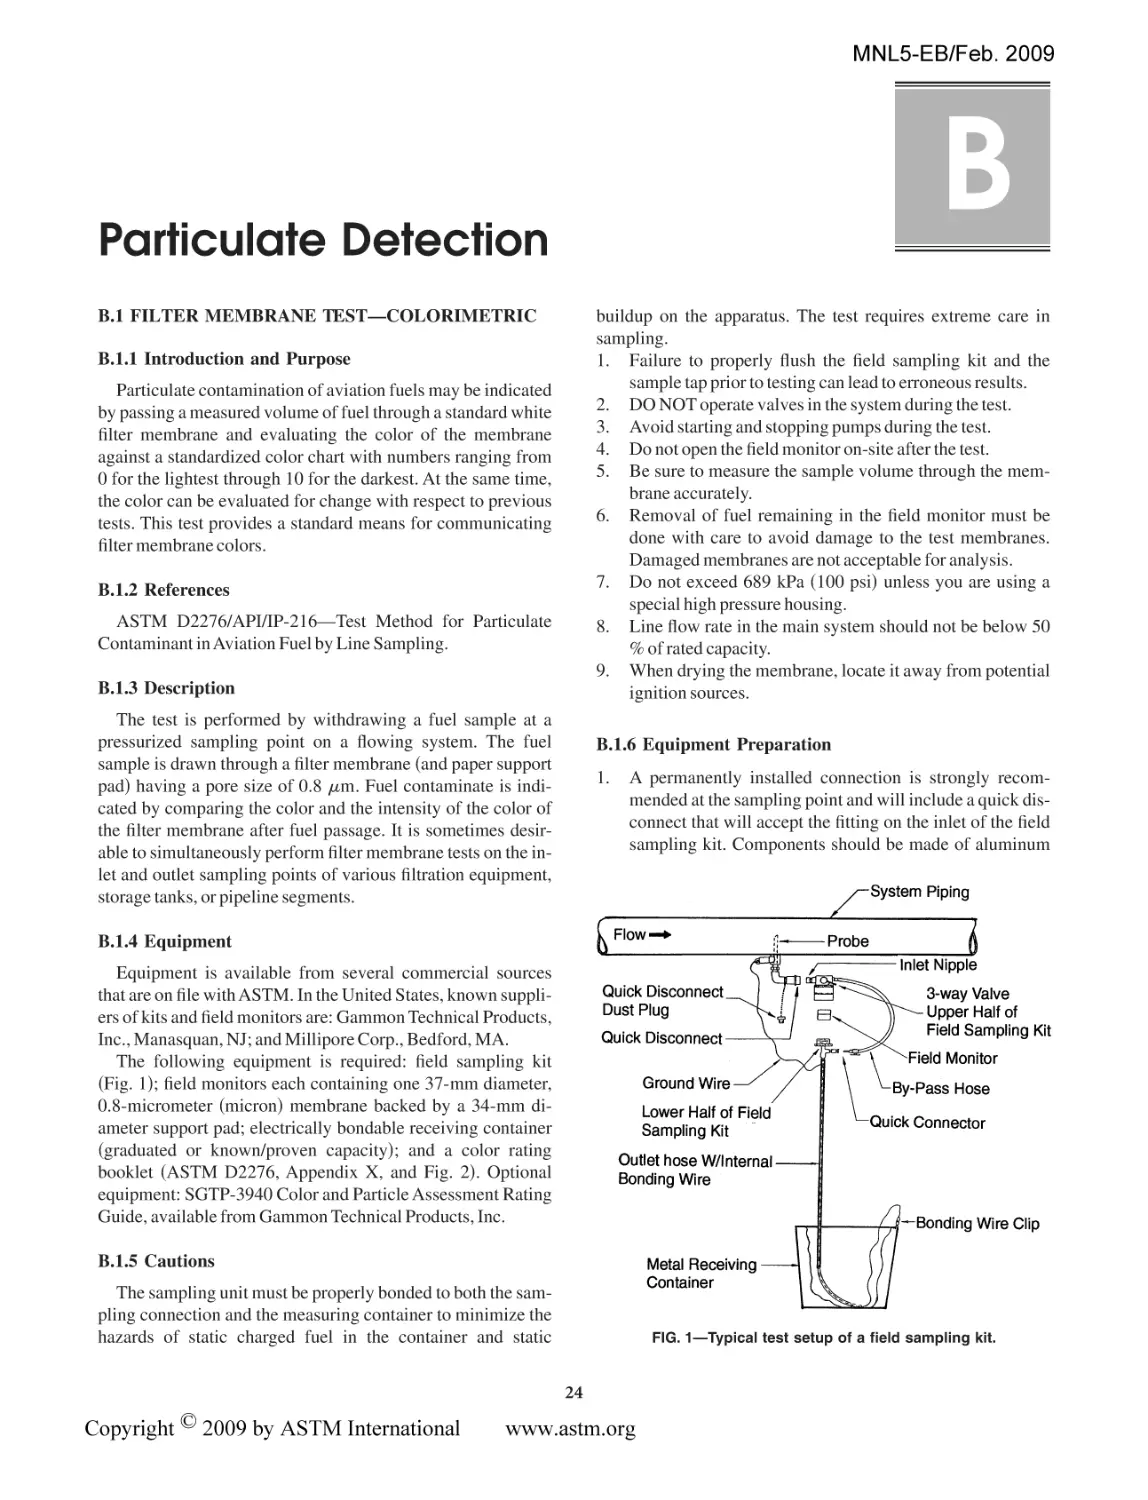 Particulate Detection